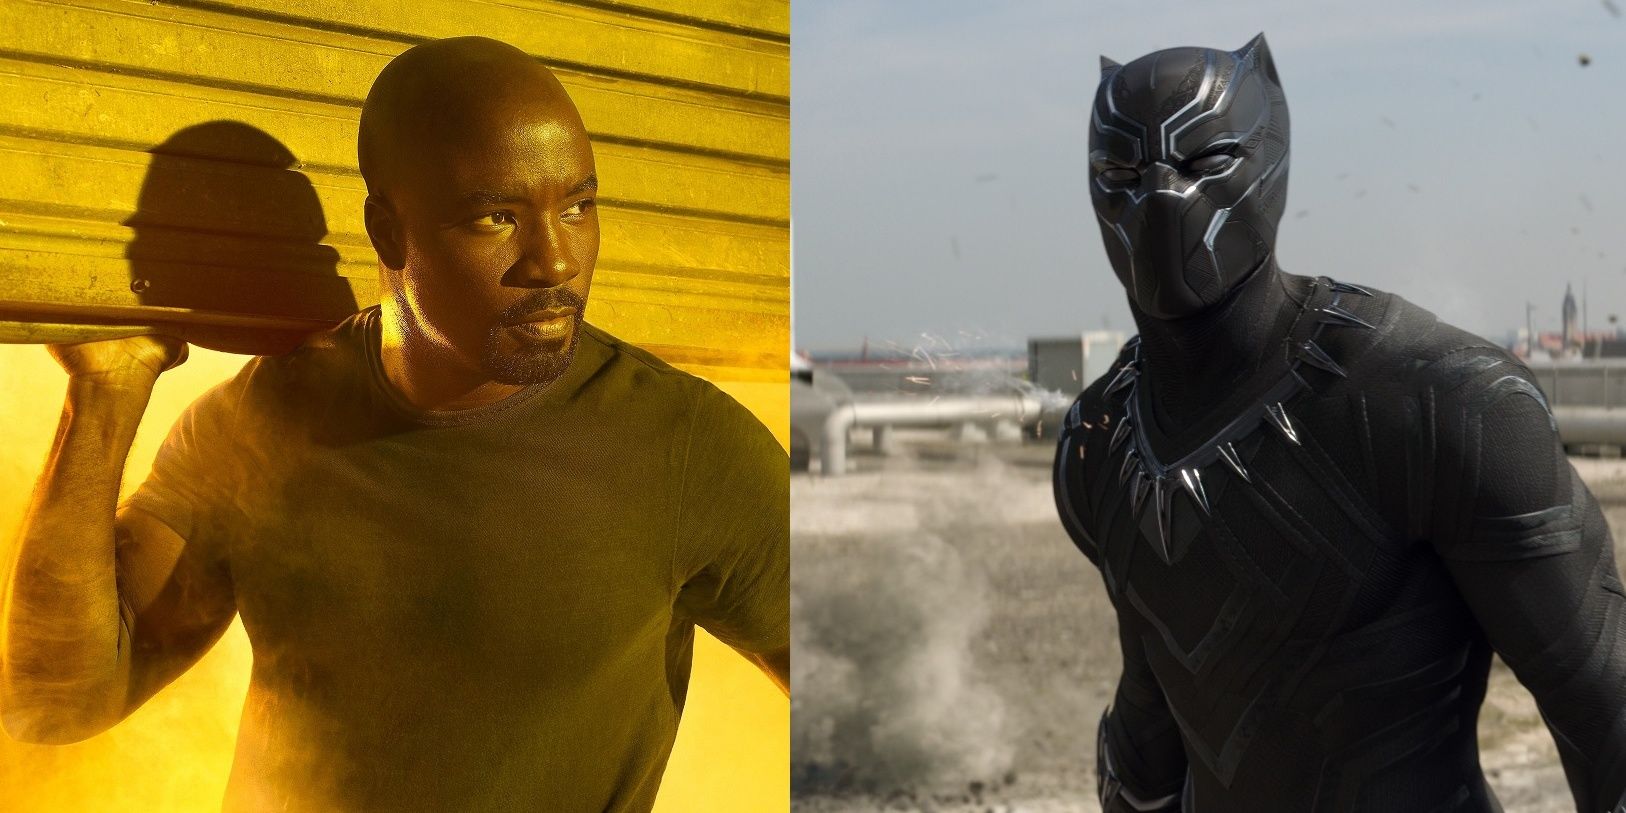 Luke Cage and Black Panther